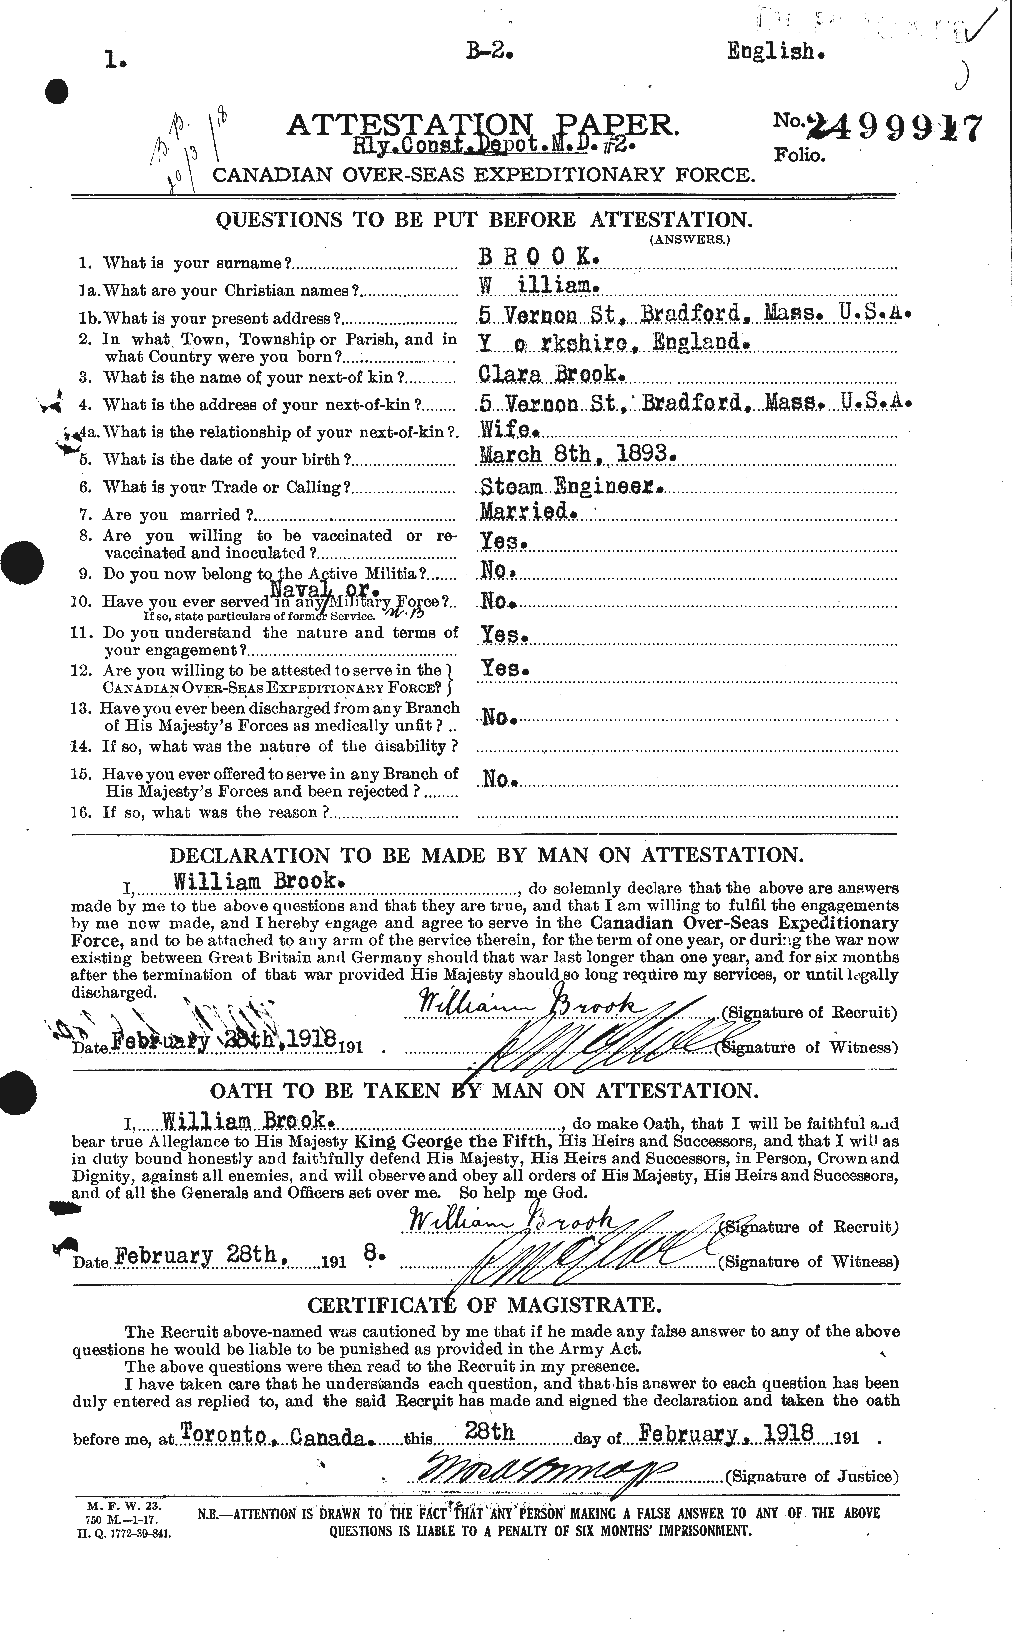 Personnel Records of the First World War - CEF 262268a